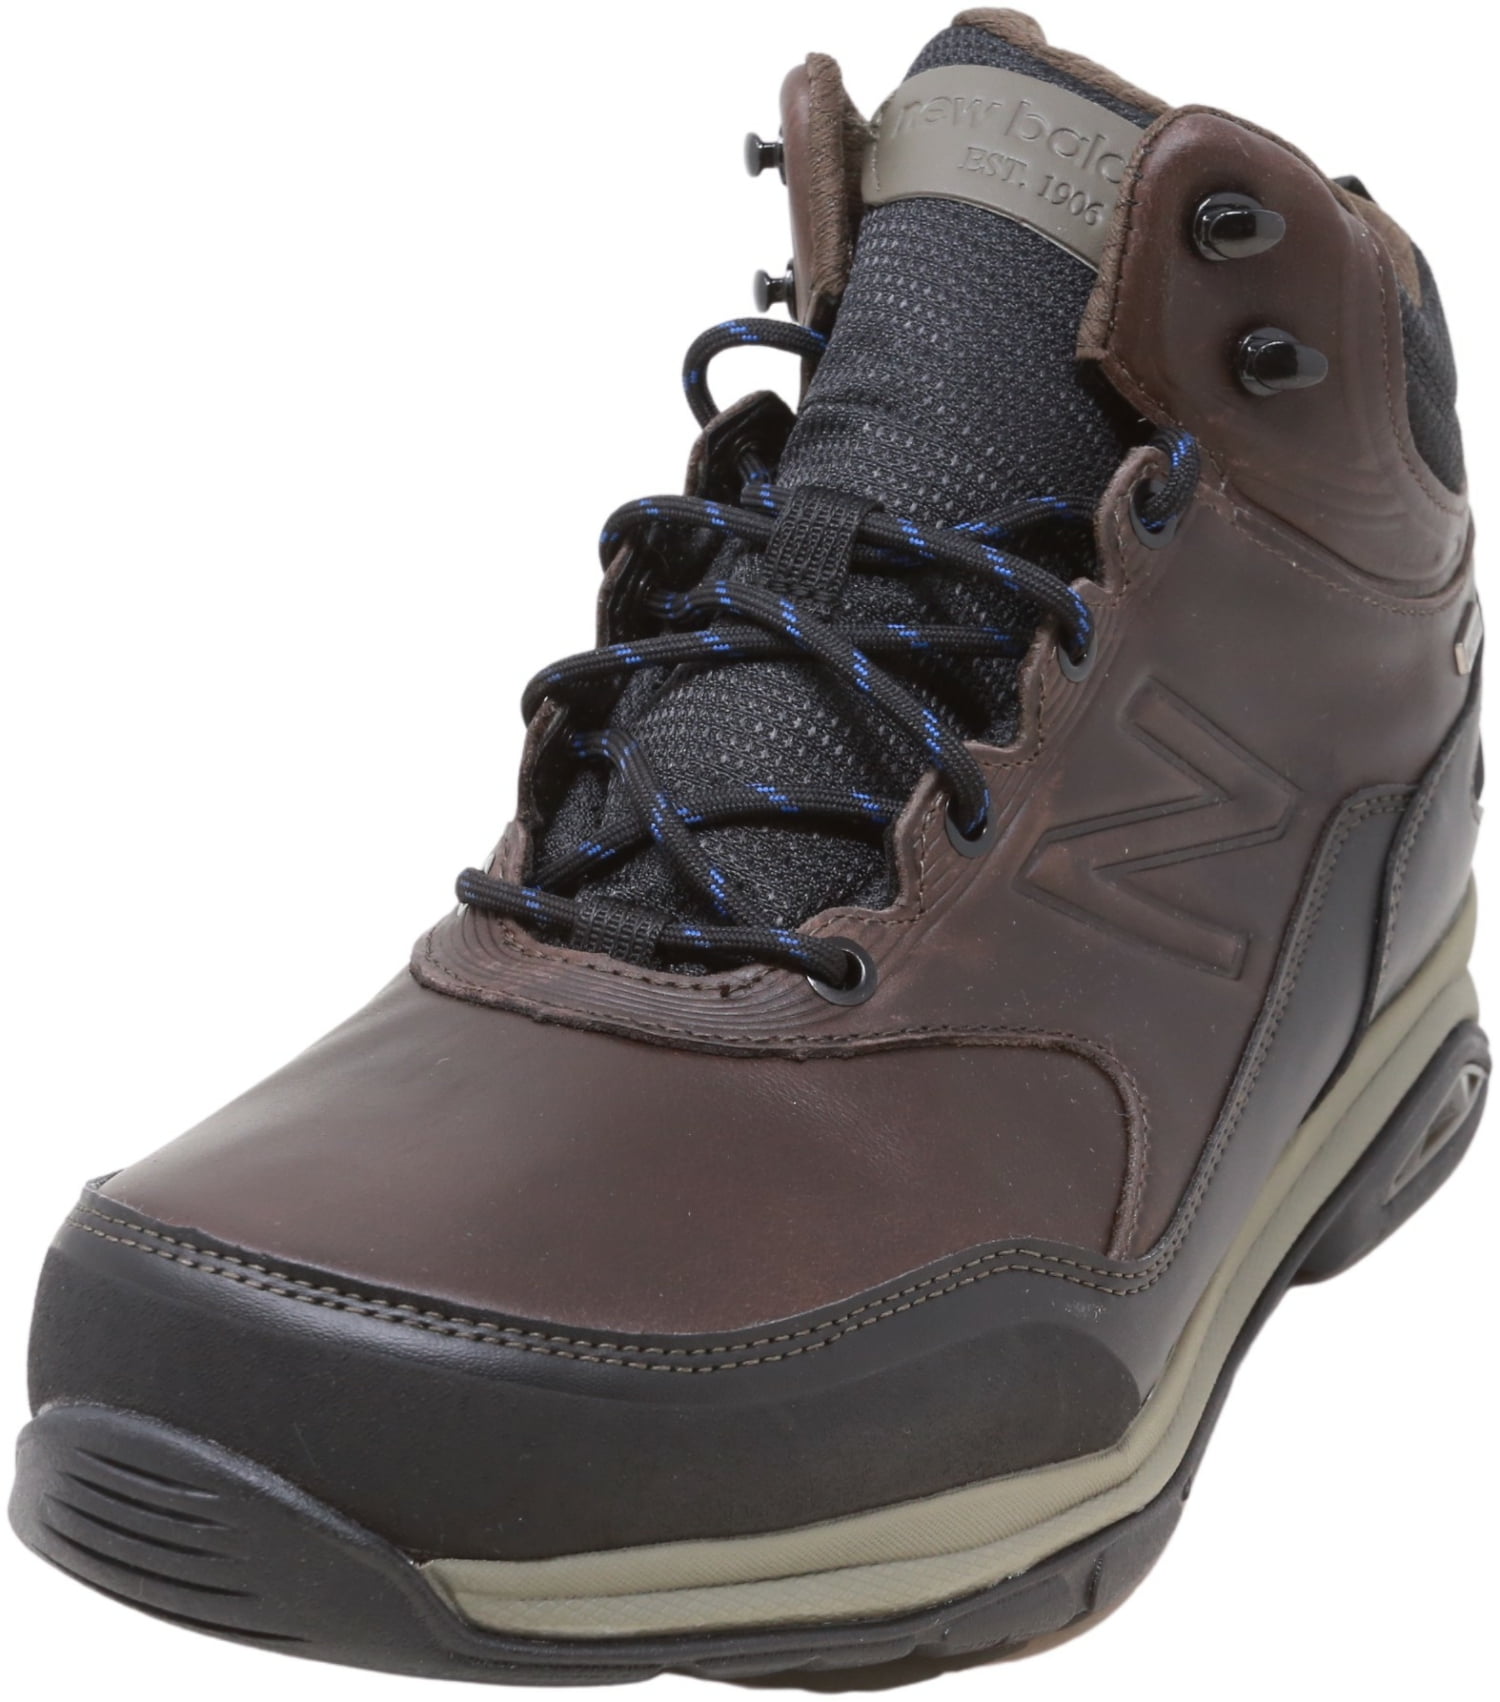 New Balance MW1400DB Dark Brown Ankle Boots Mens Boots Size 11 New ...